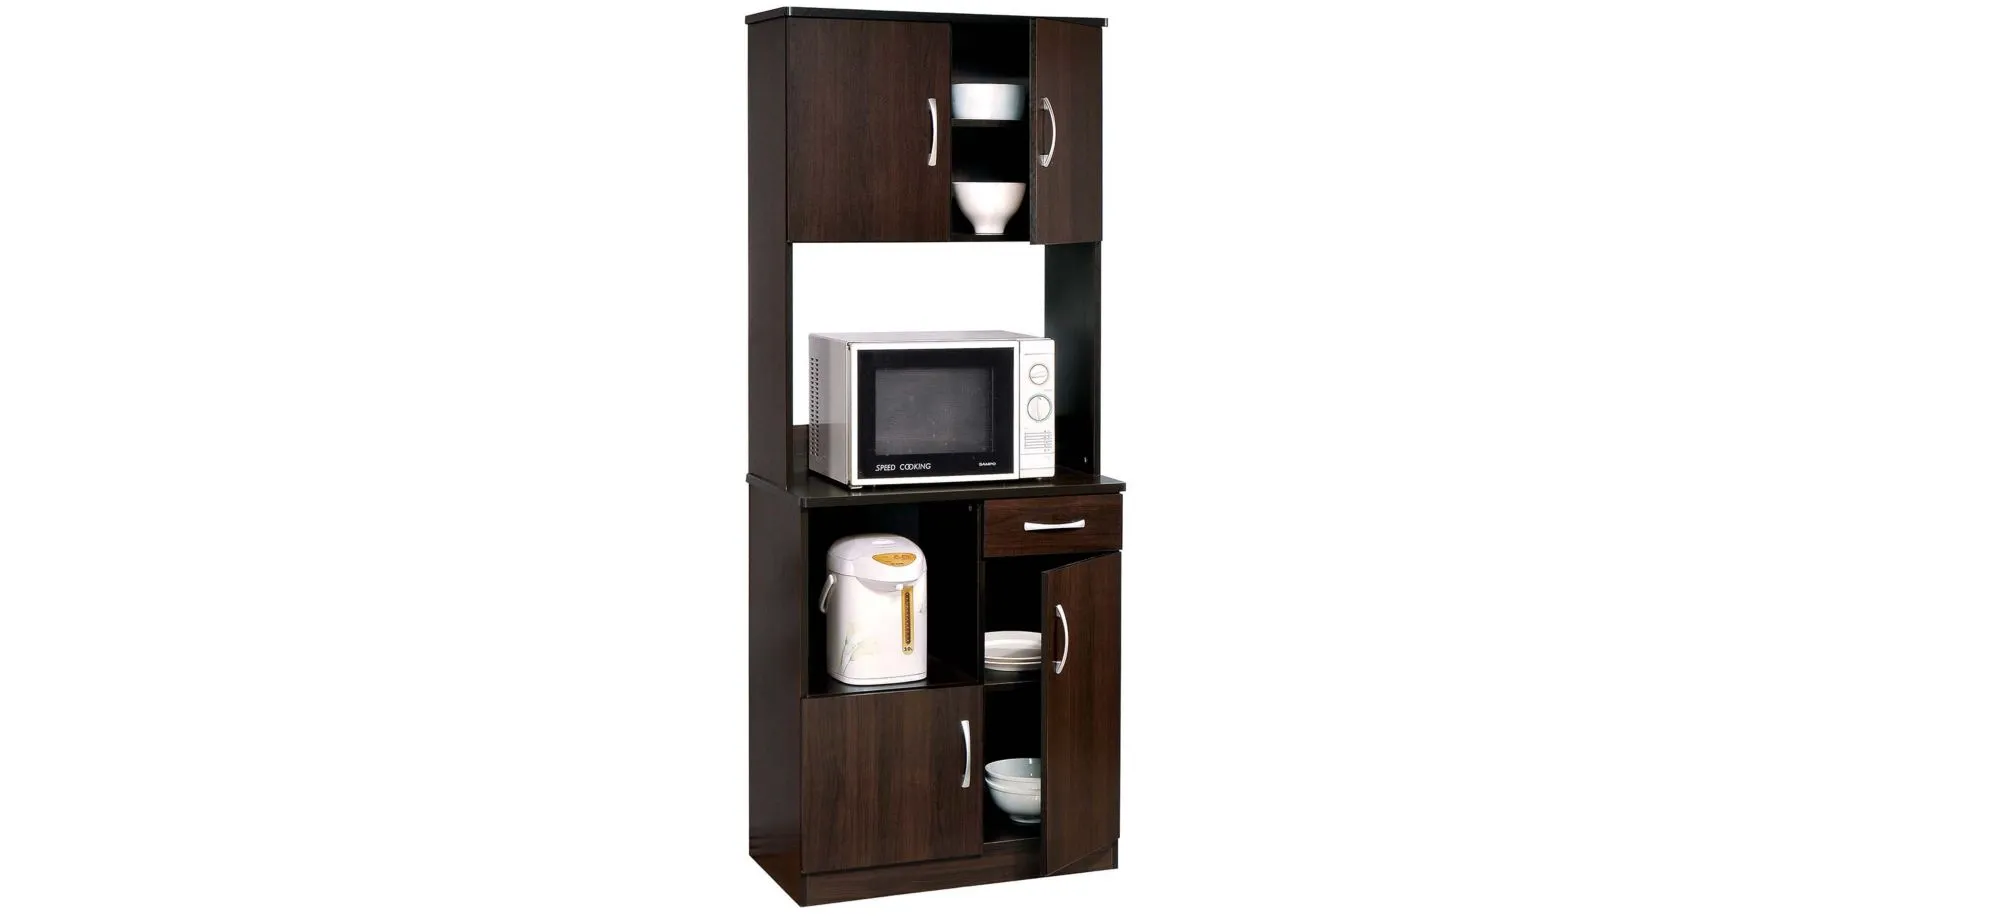 Quintus Kitchen Cabinet -2pc. in Espresso by Acme Furniture Industry